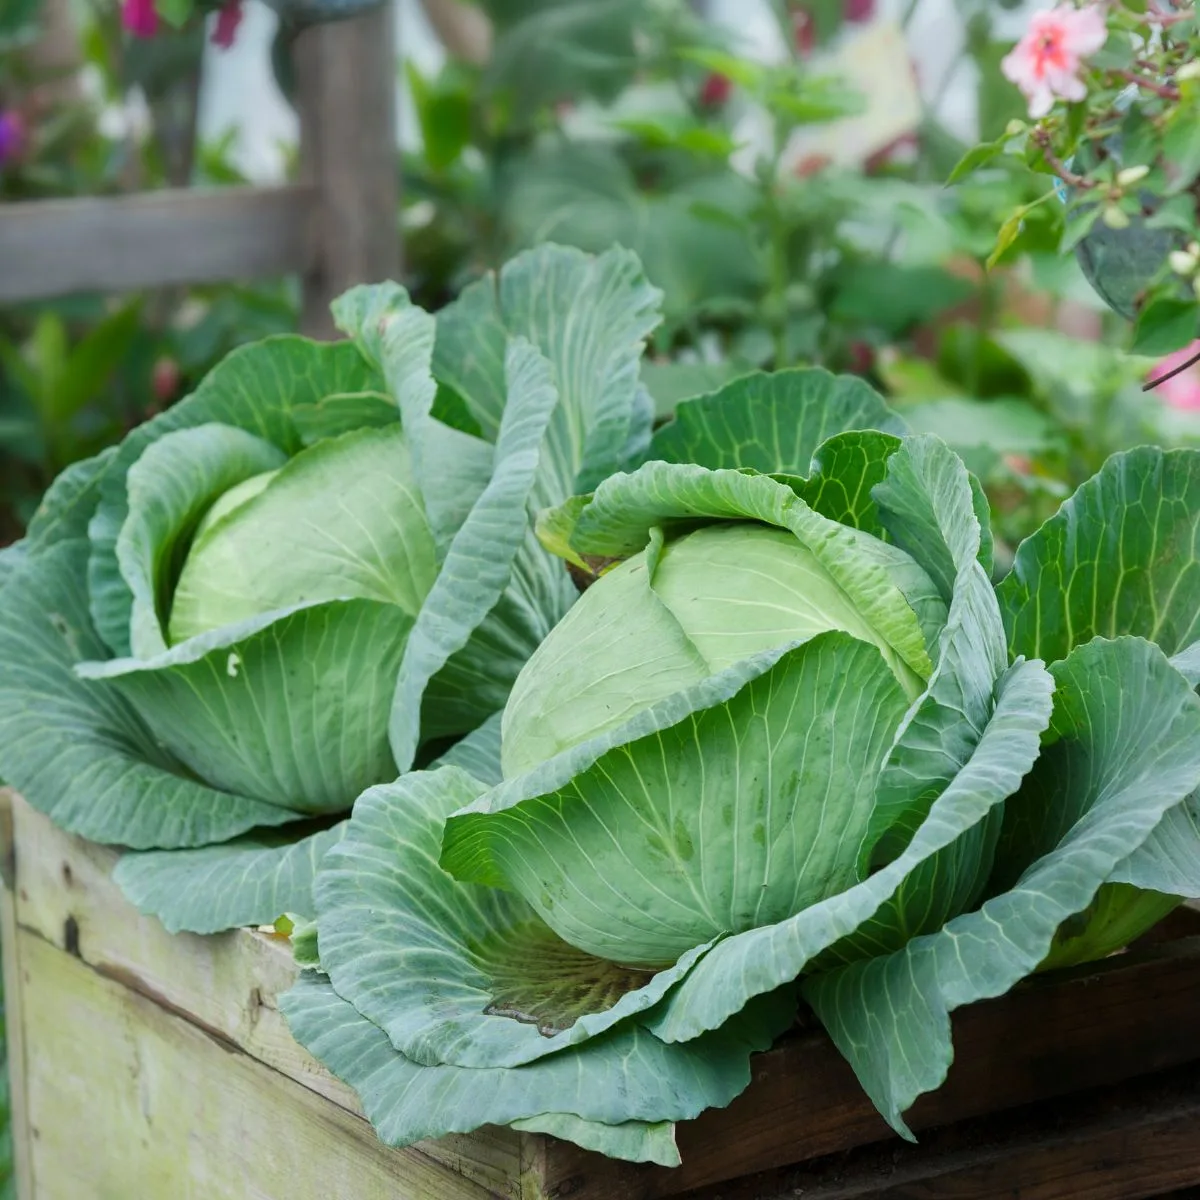 A couple of beautiful cabbages growing in a raised bed.